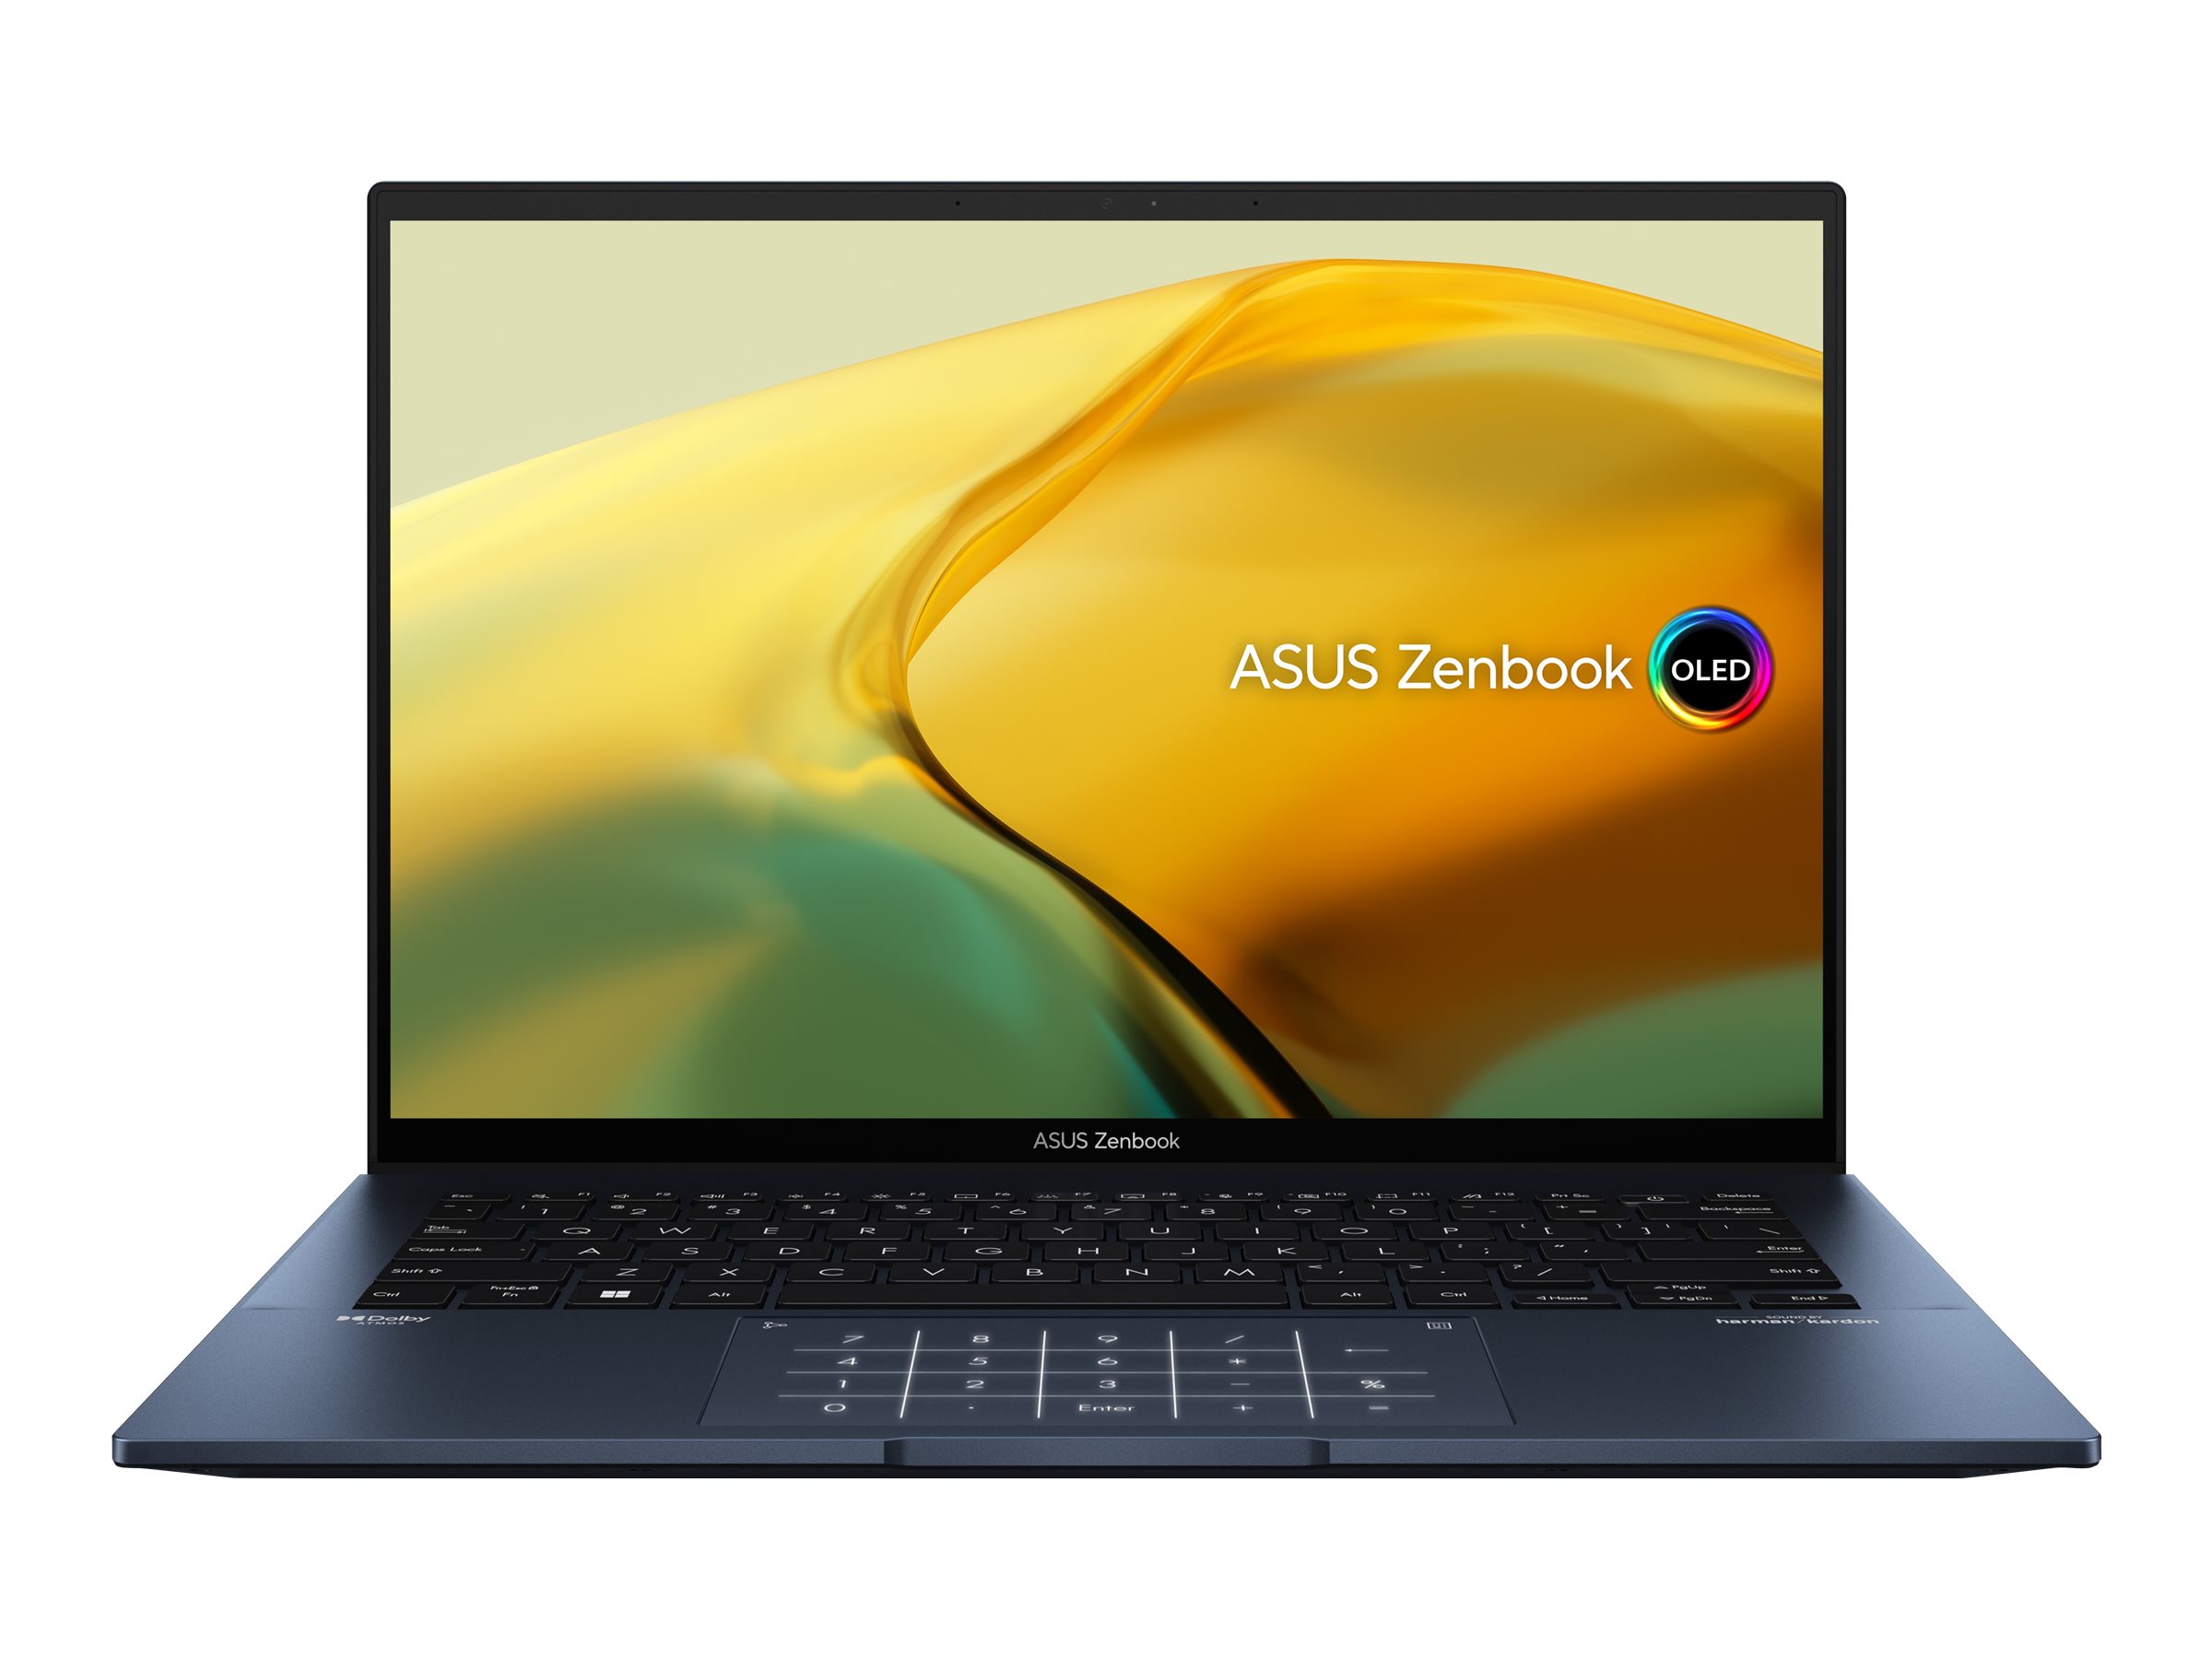 ASUS Zenbook Laptop - 14 Inch - 512GB SSD - Intel Core i7 - Intel Iris Xe - Ponder Blue - UX3402ZA-DS71T-CA - Open Box or Display Models Only